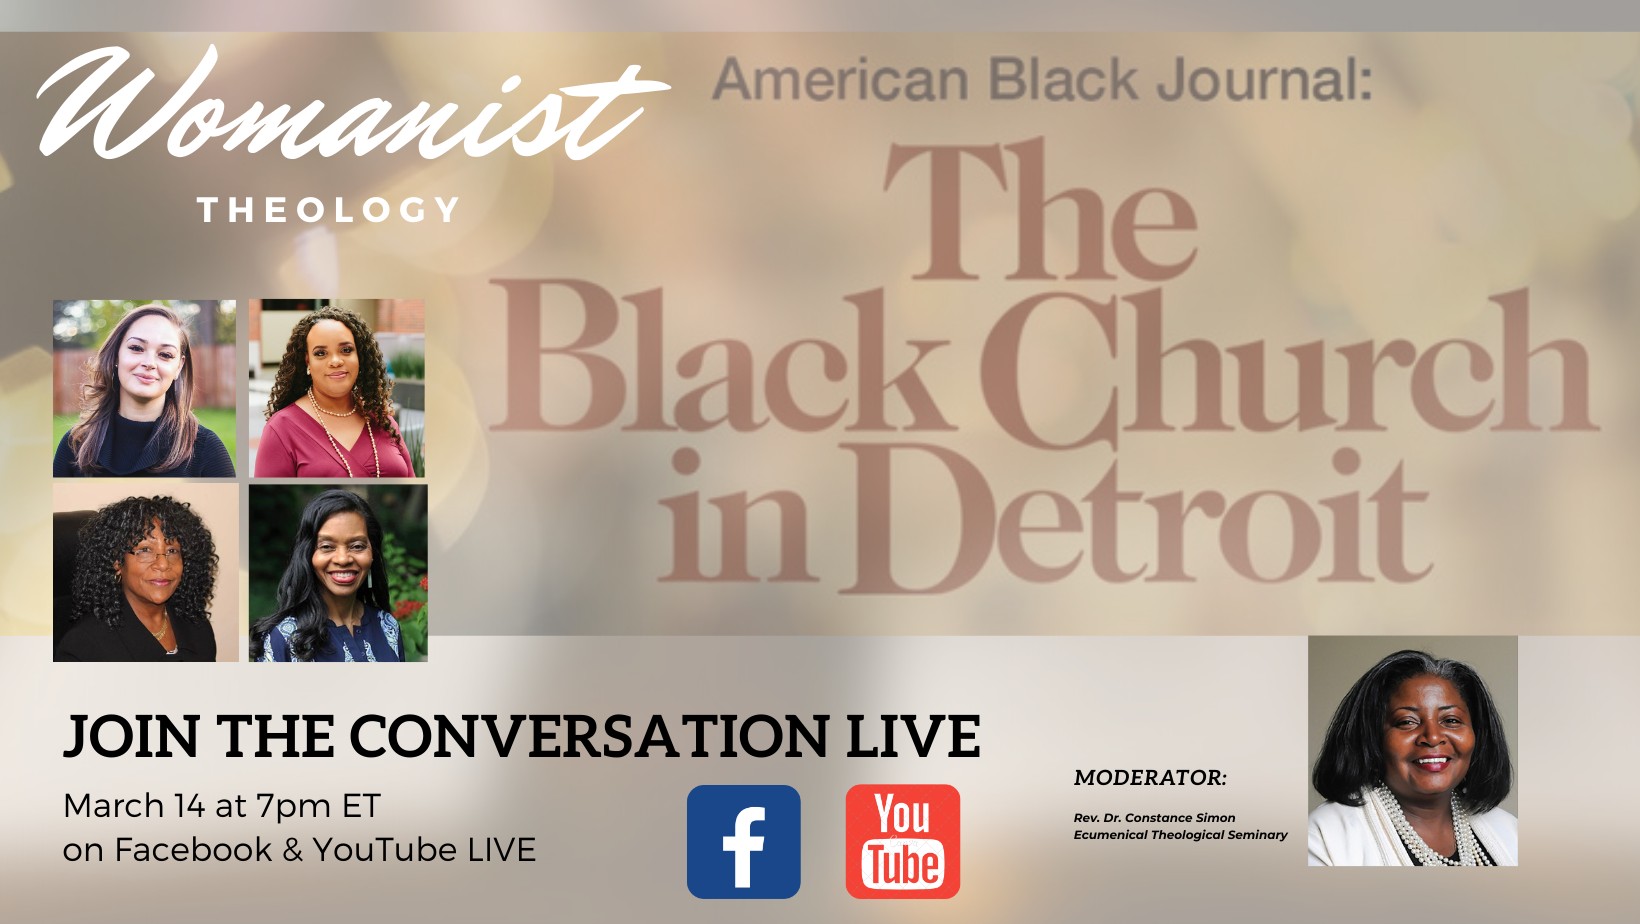 The Black Church in Detroit's Womanist Theology Watch Party Graphic